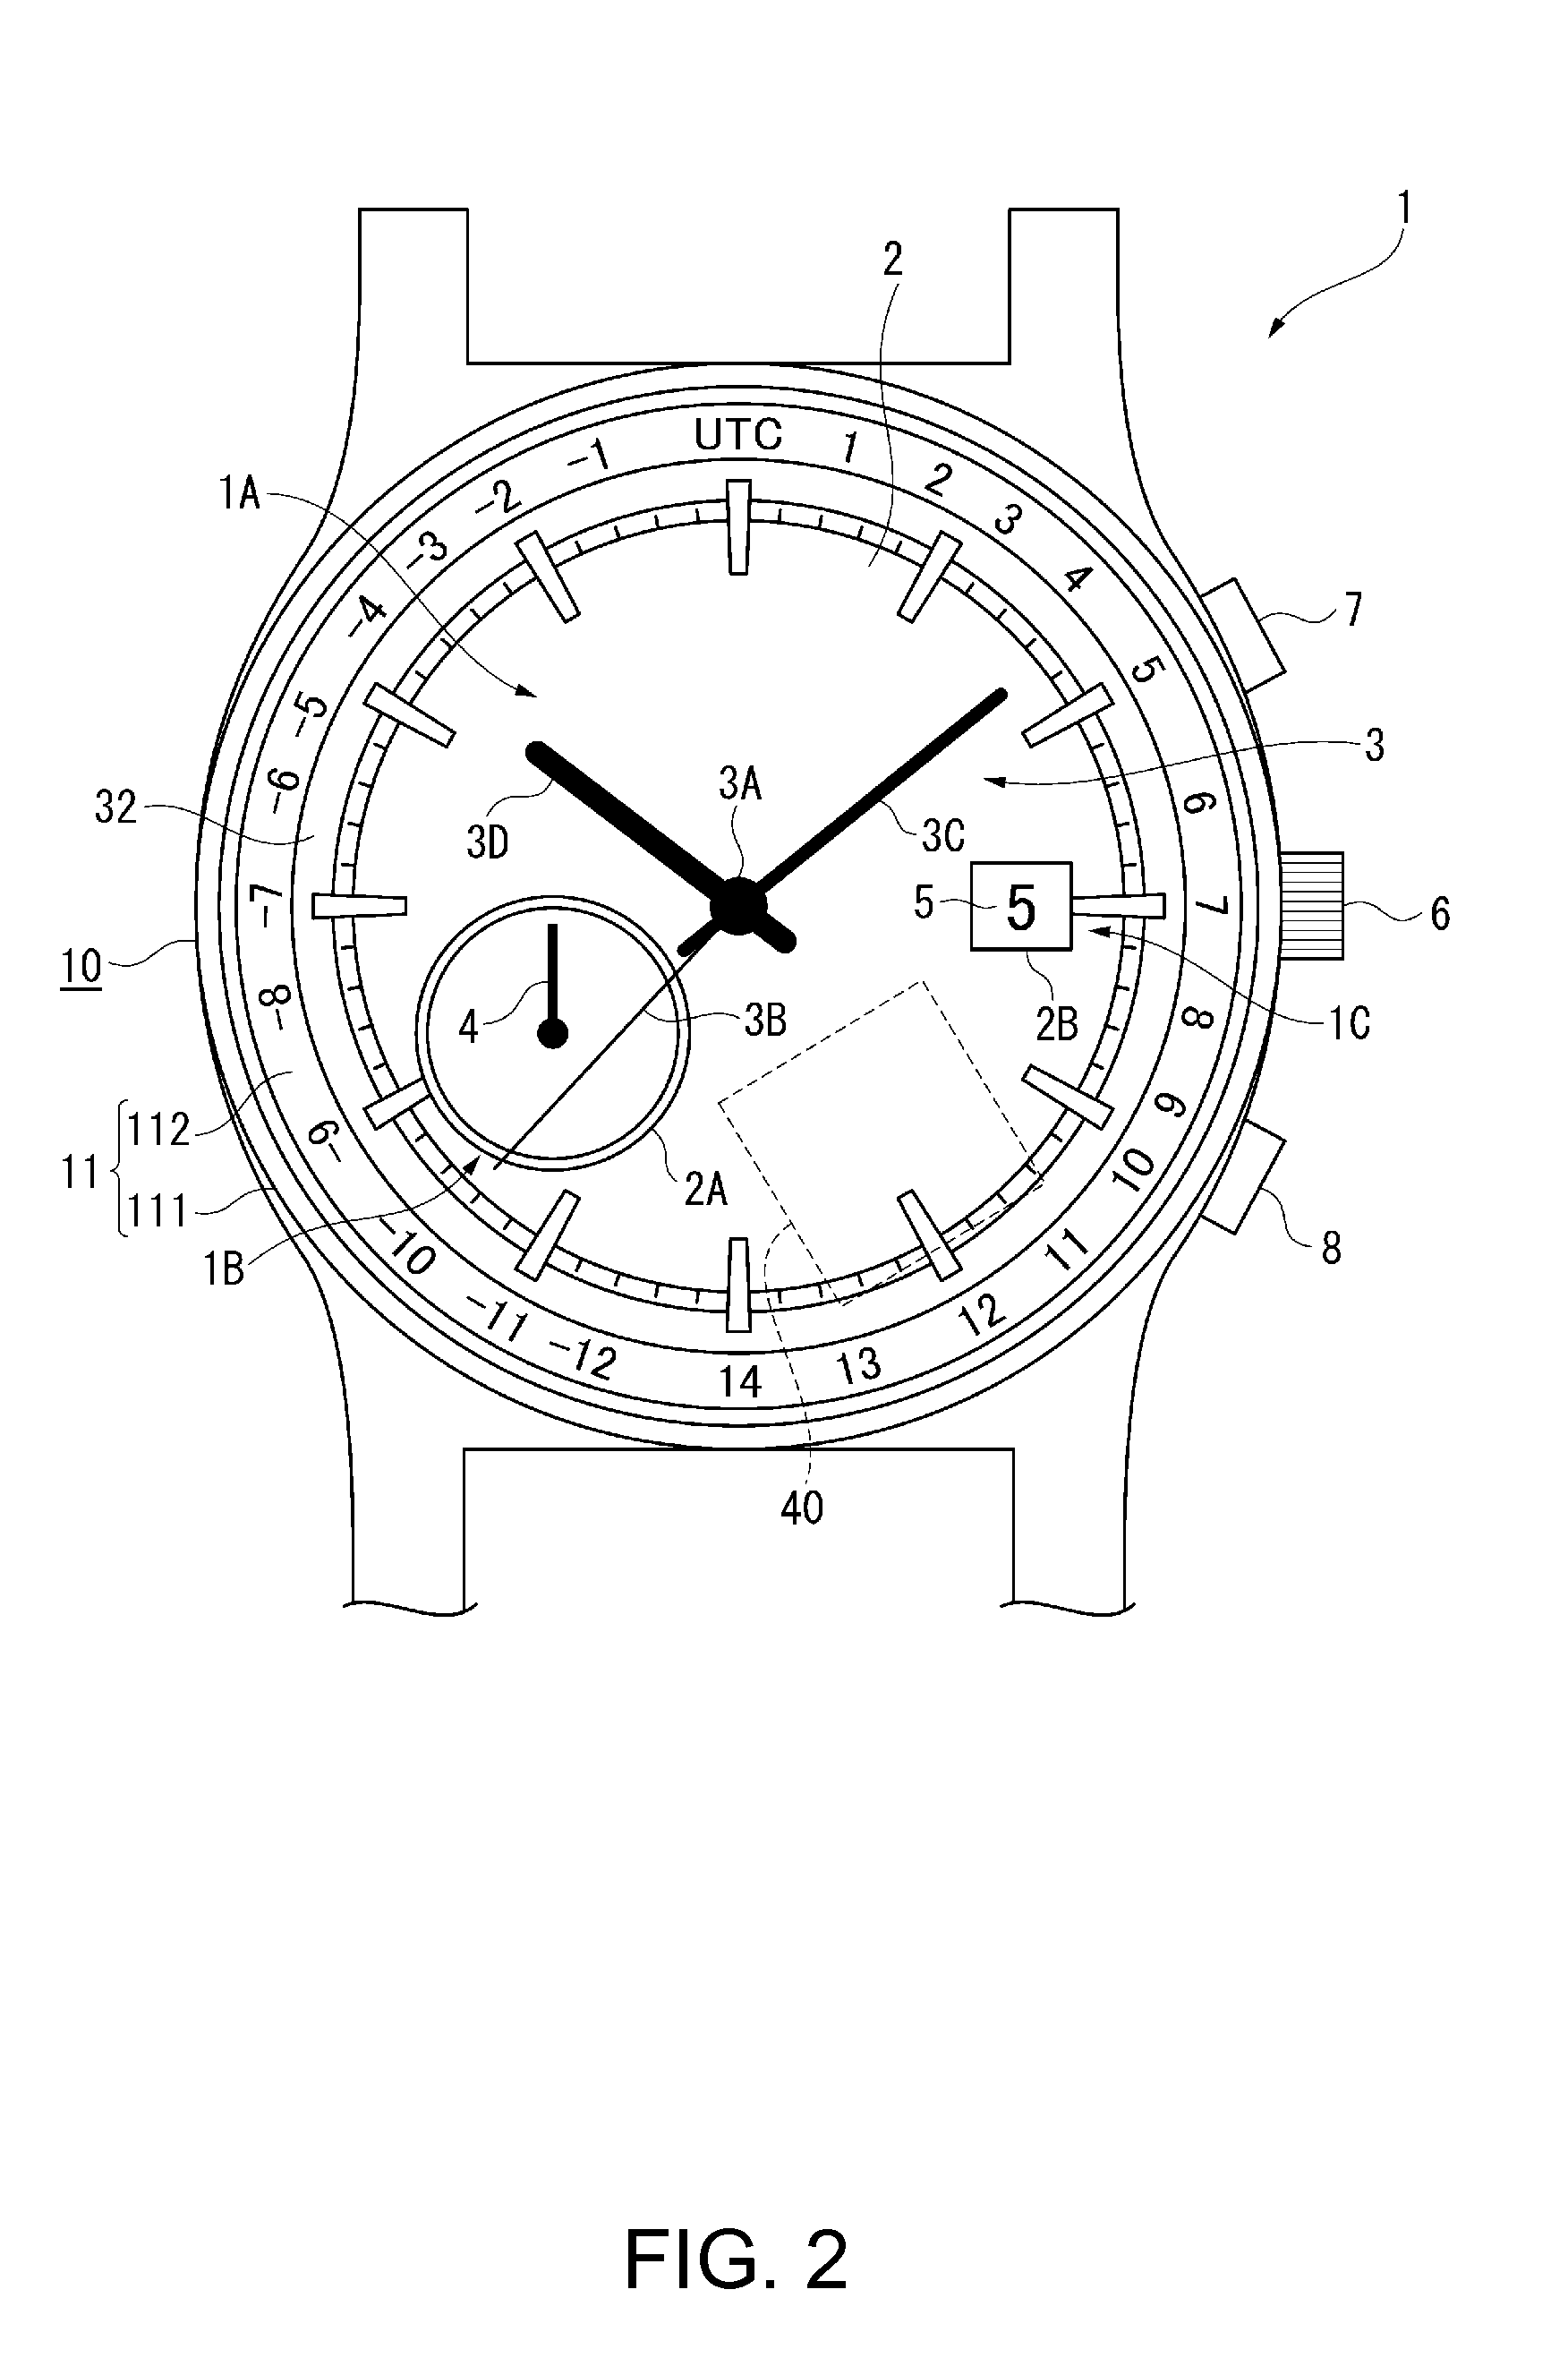 Electronic timepiece